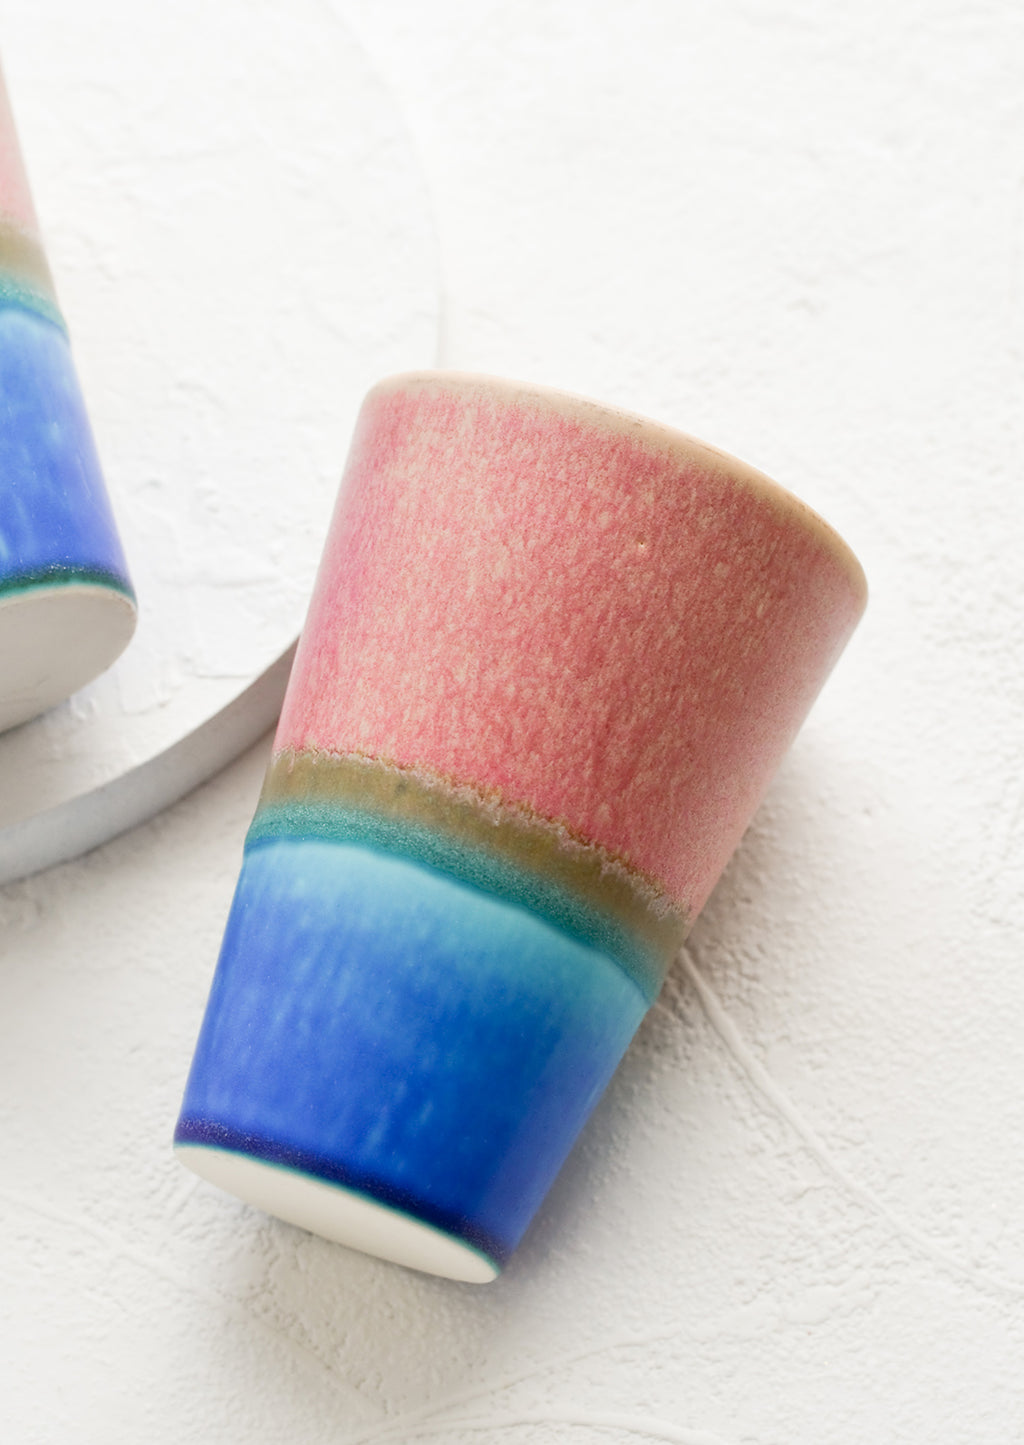 Pink / Bright Blue: A ceramic cup in pink and blue.